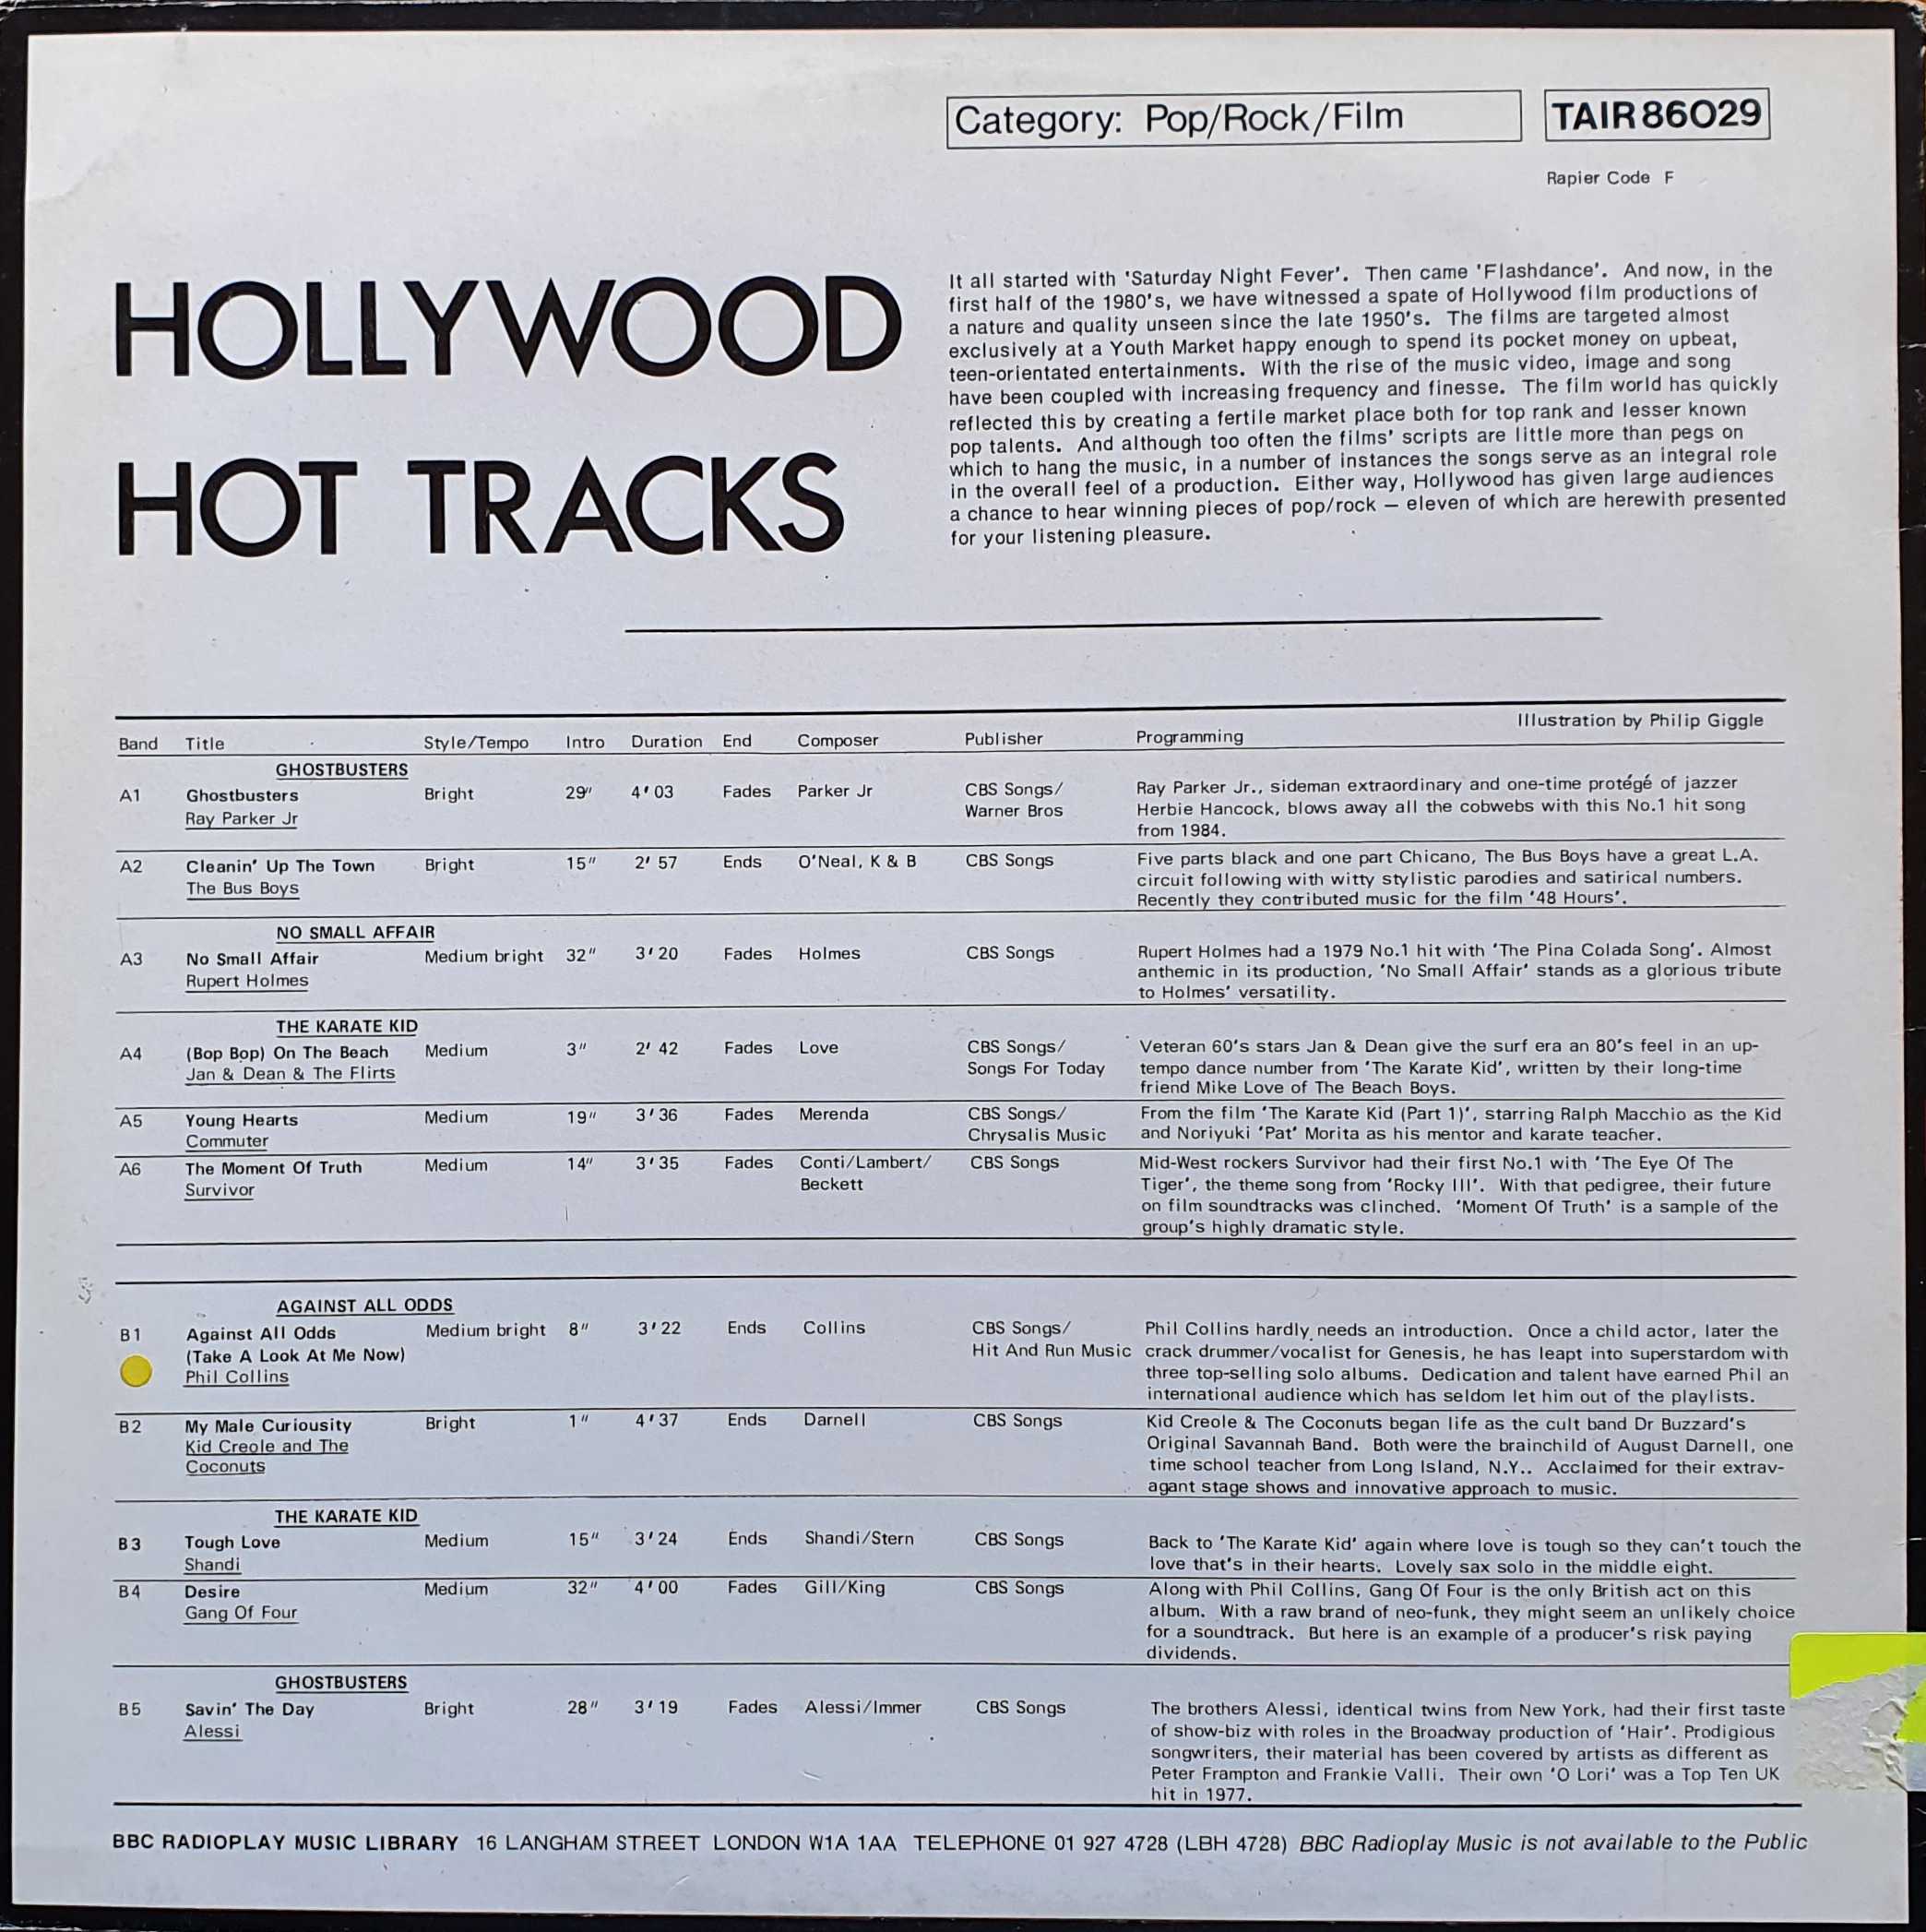 Picture of TAIR 86029 Hollywood hot tracks by artist Various from the BBC records and Tapes library